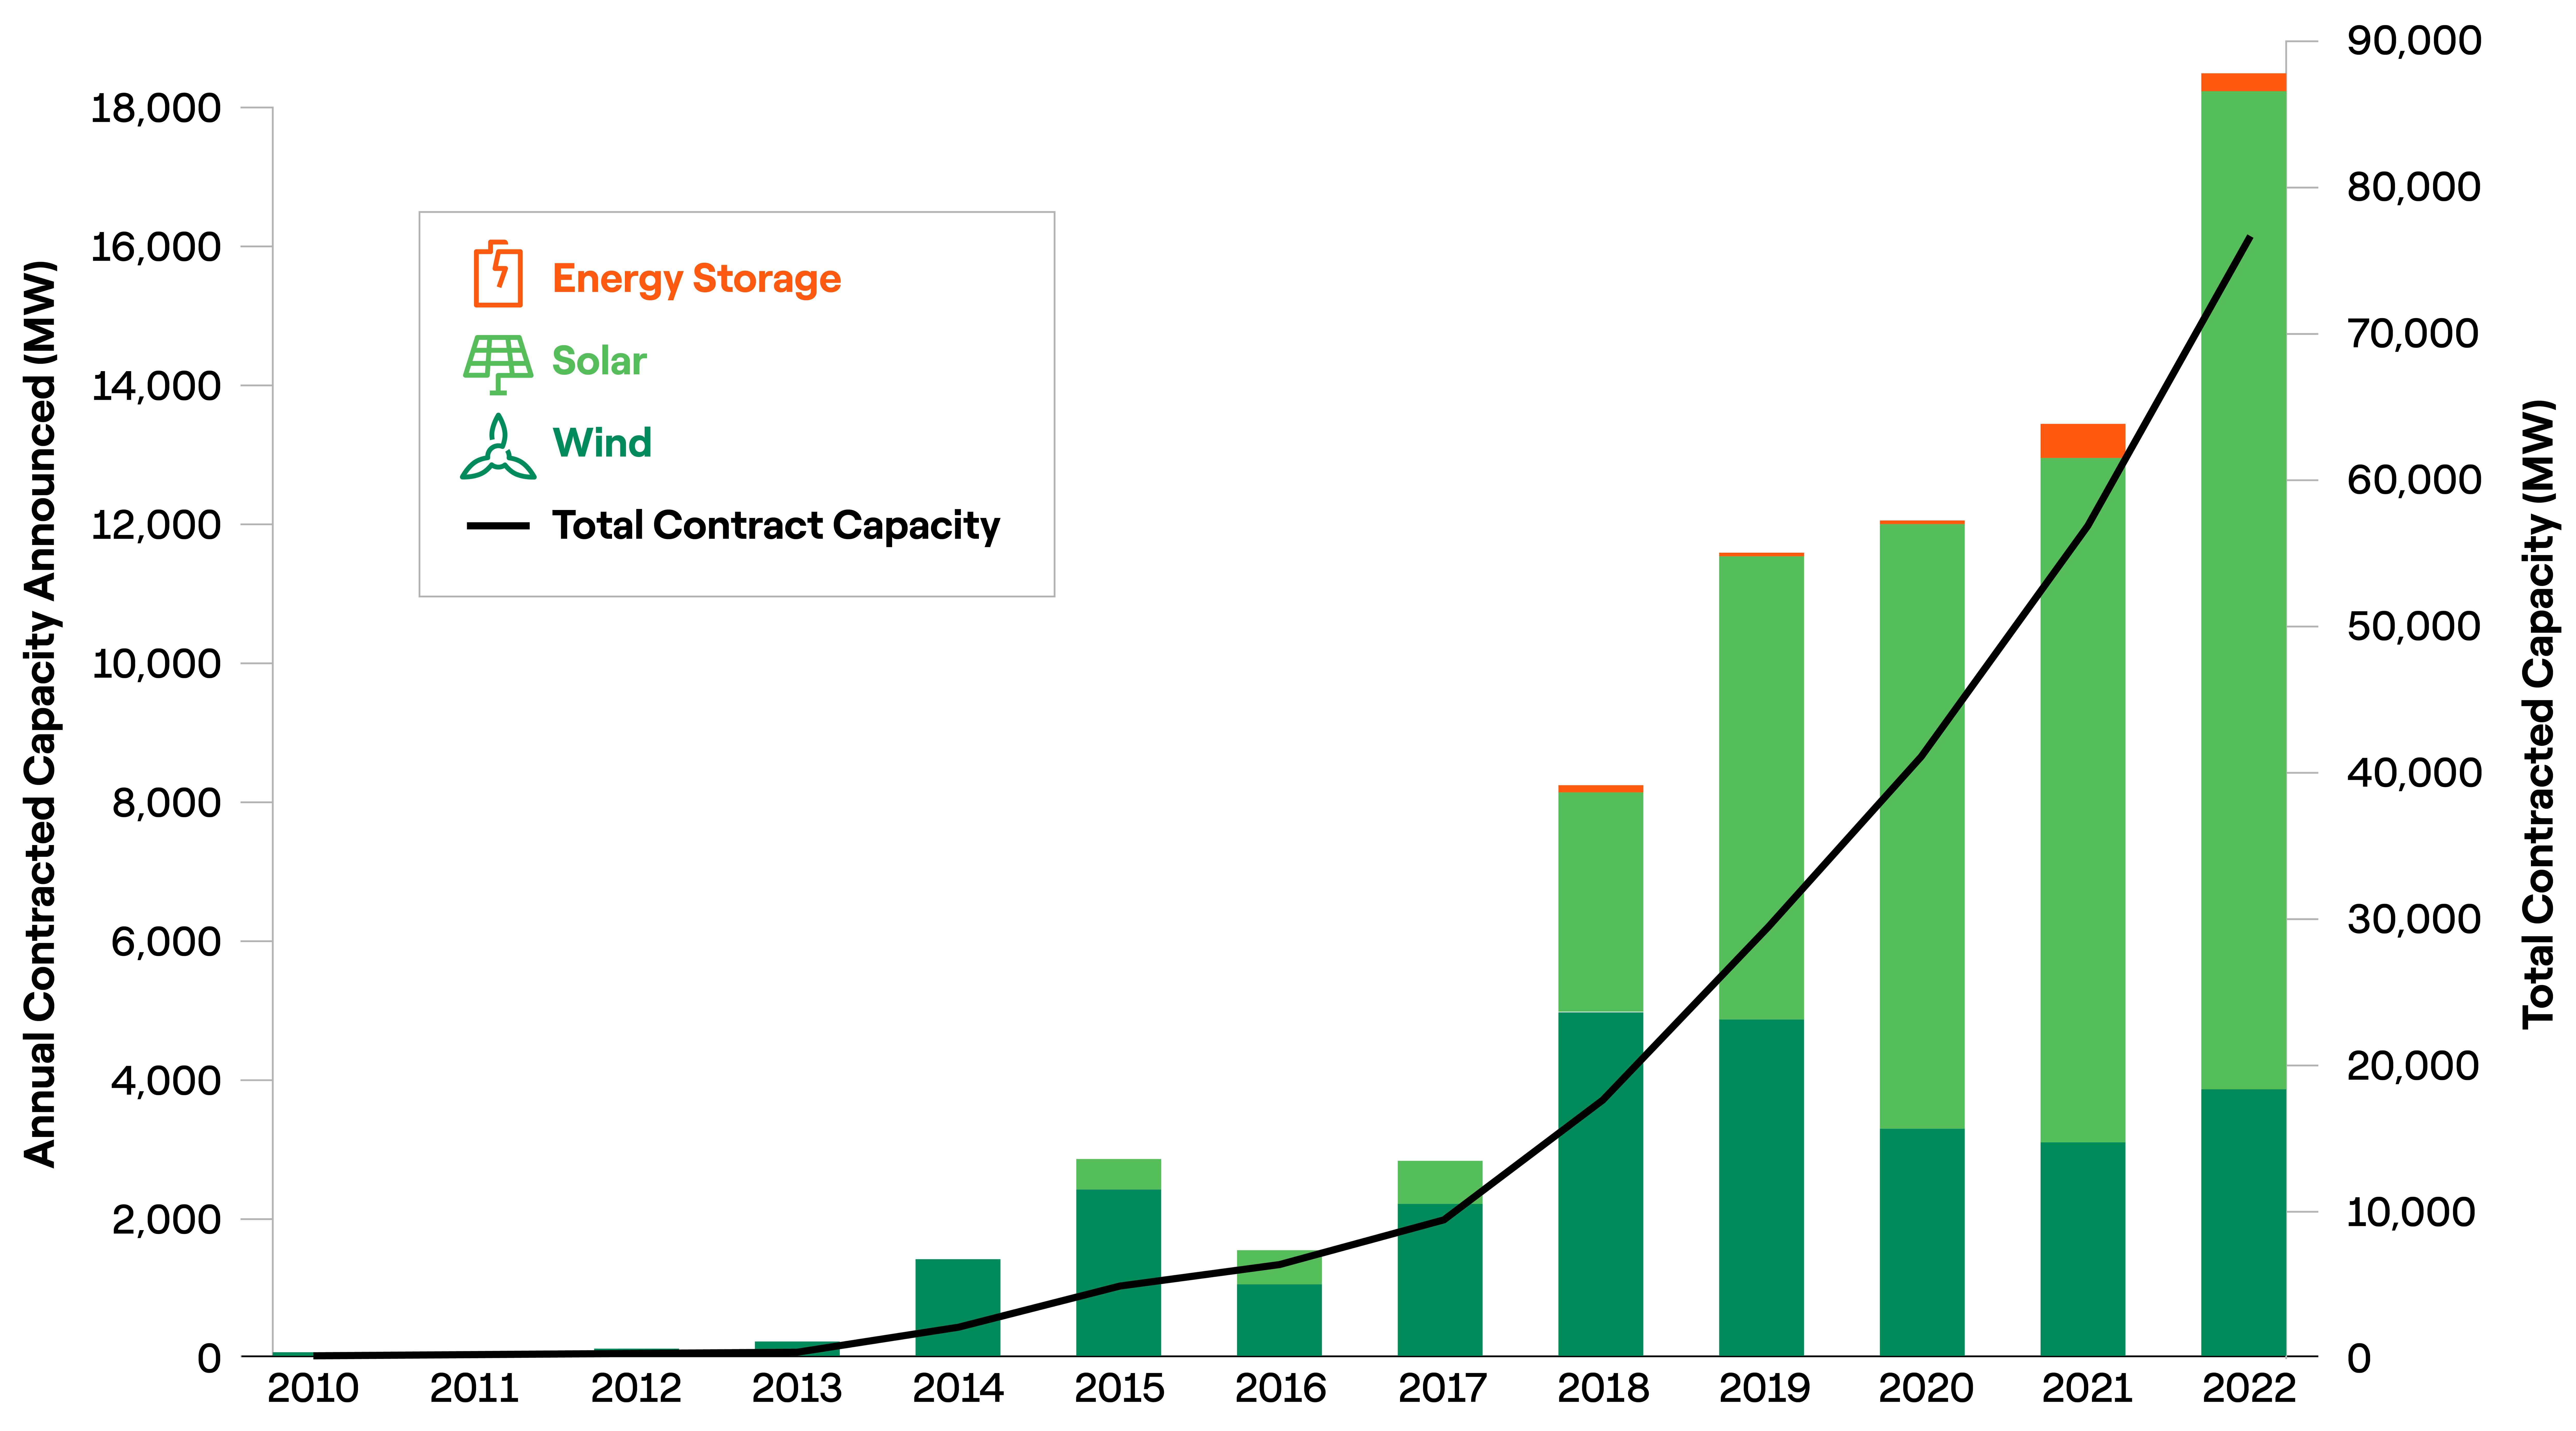 Graph showing corporate clean power procurement by announcement year